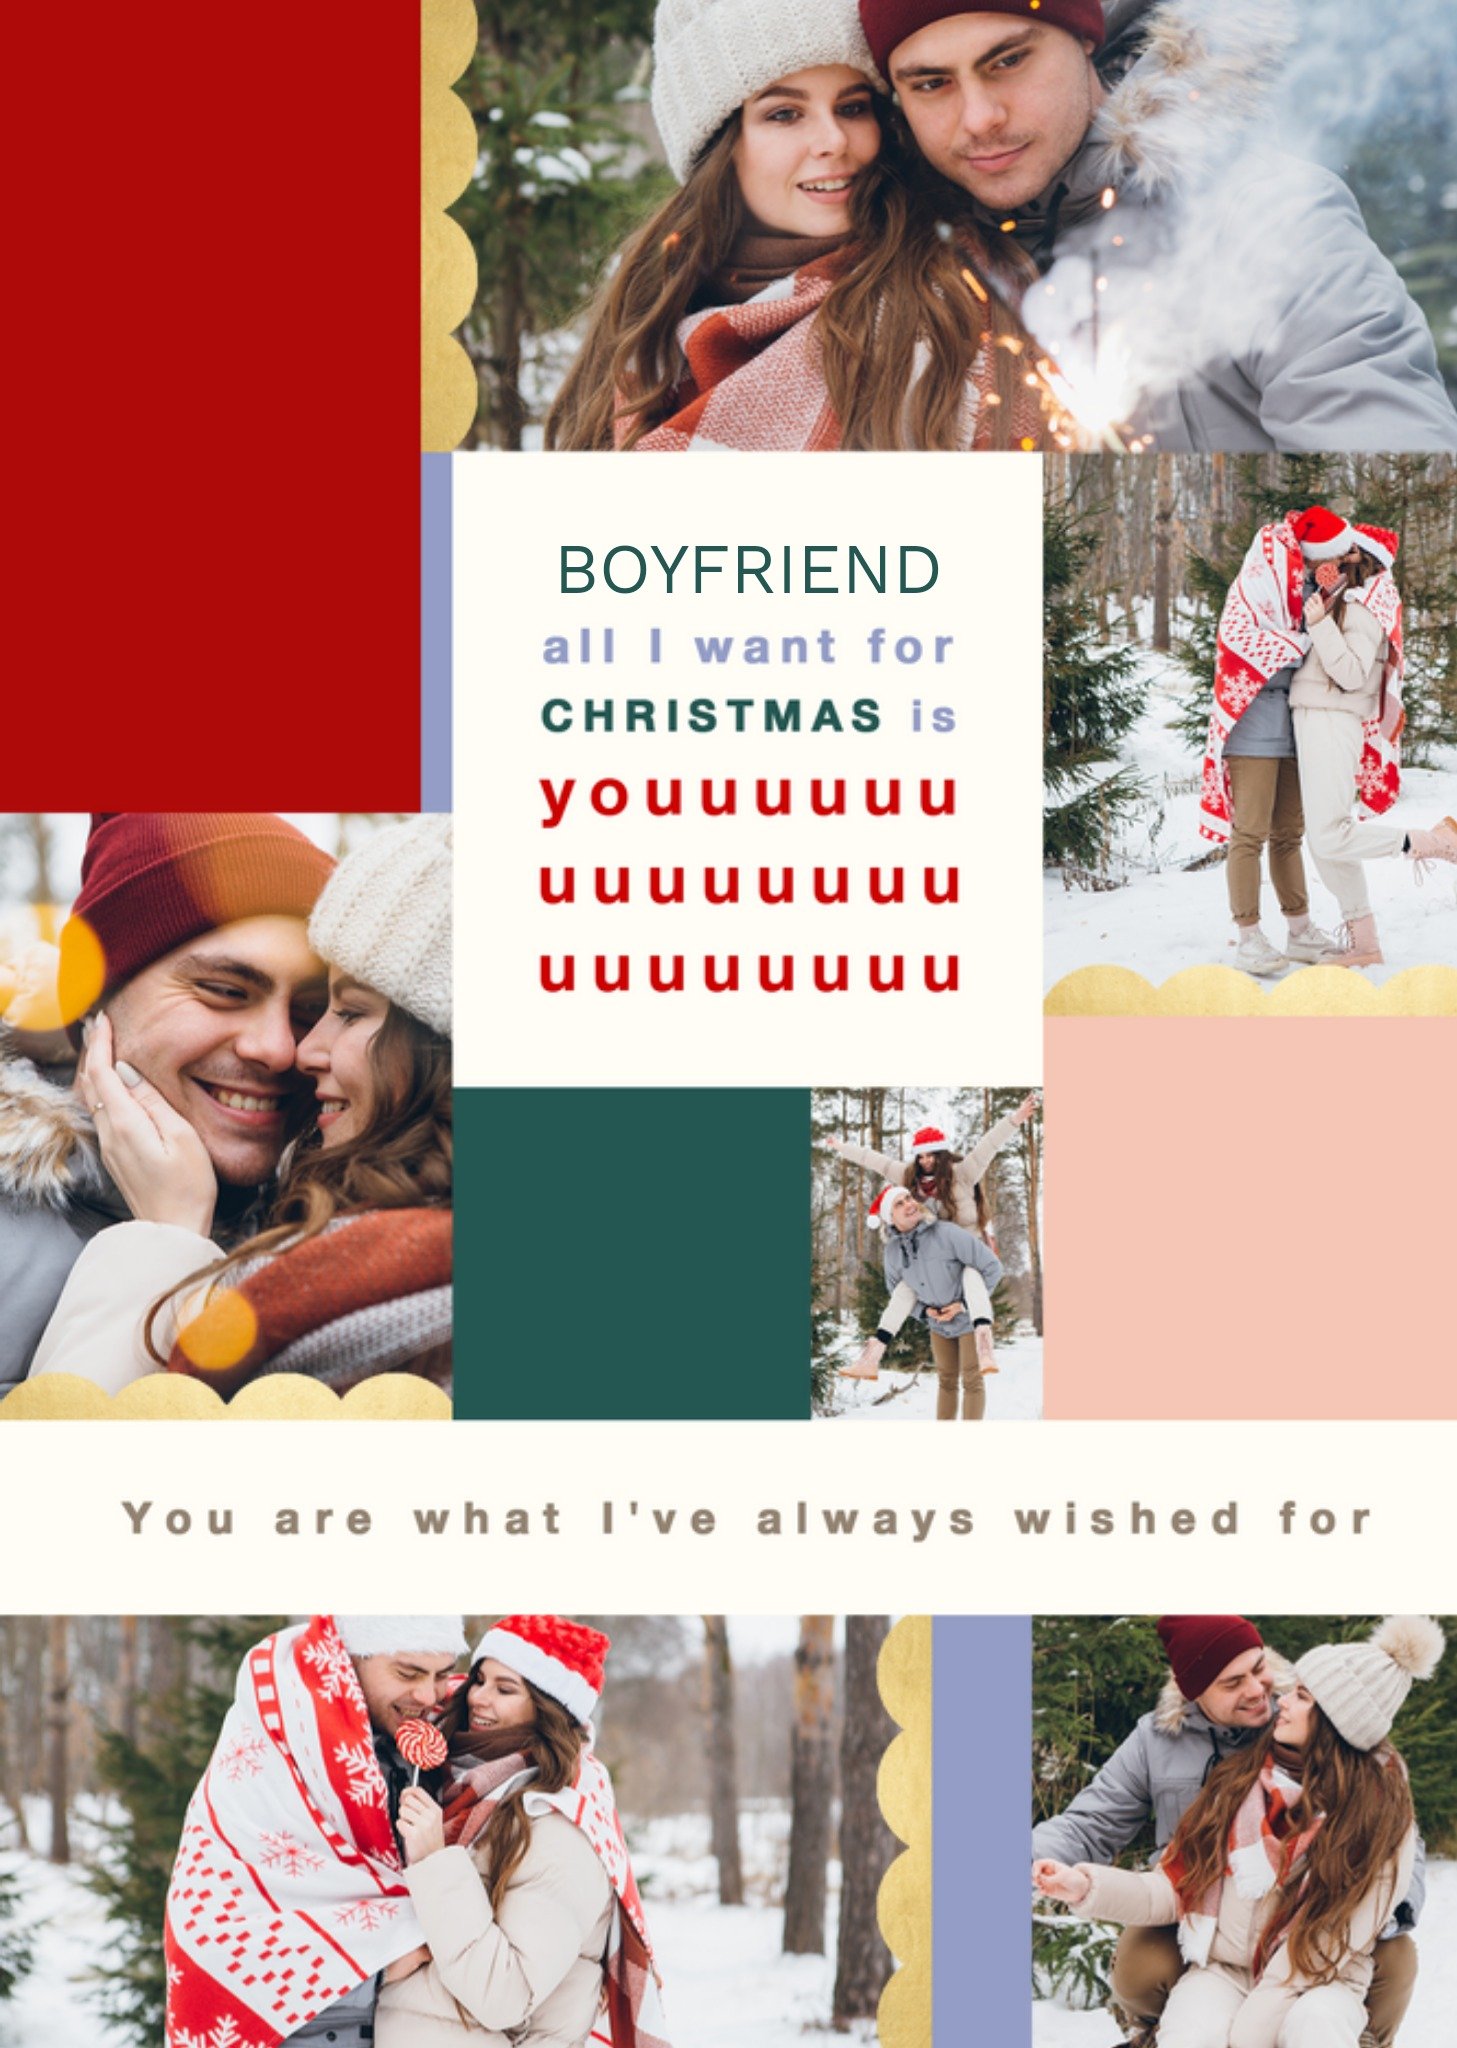 Moonpig Colourful And Loving Boyfriend All I Want For Christmas Is You Christmas Greetings Card, Lar